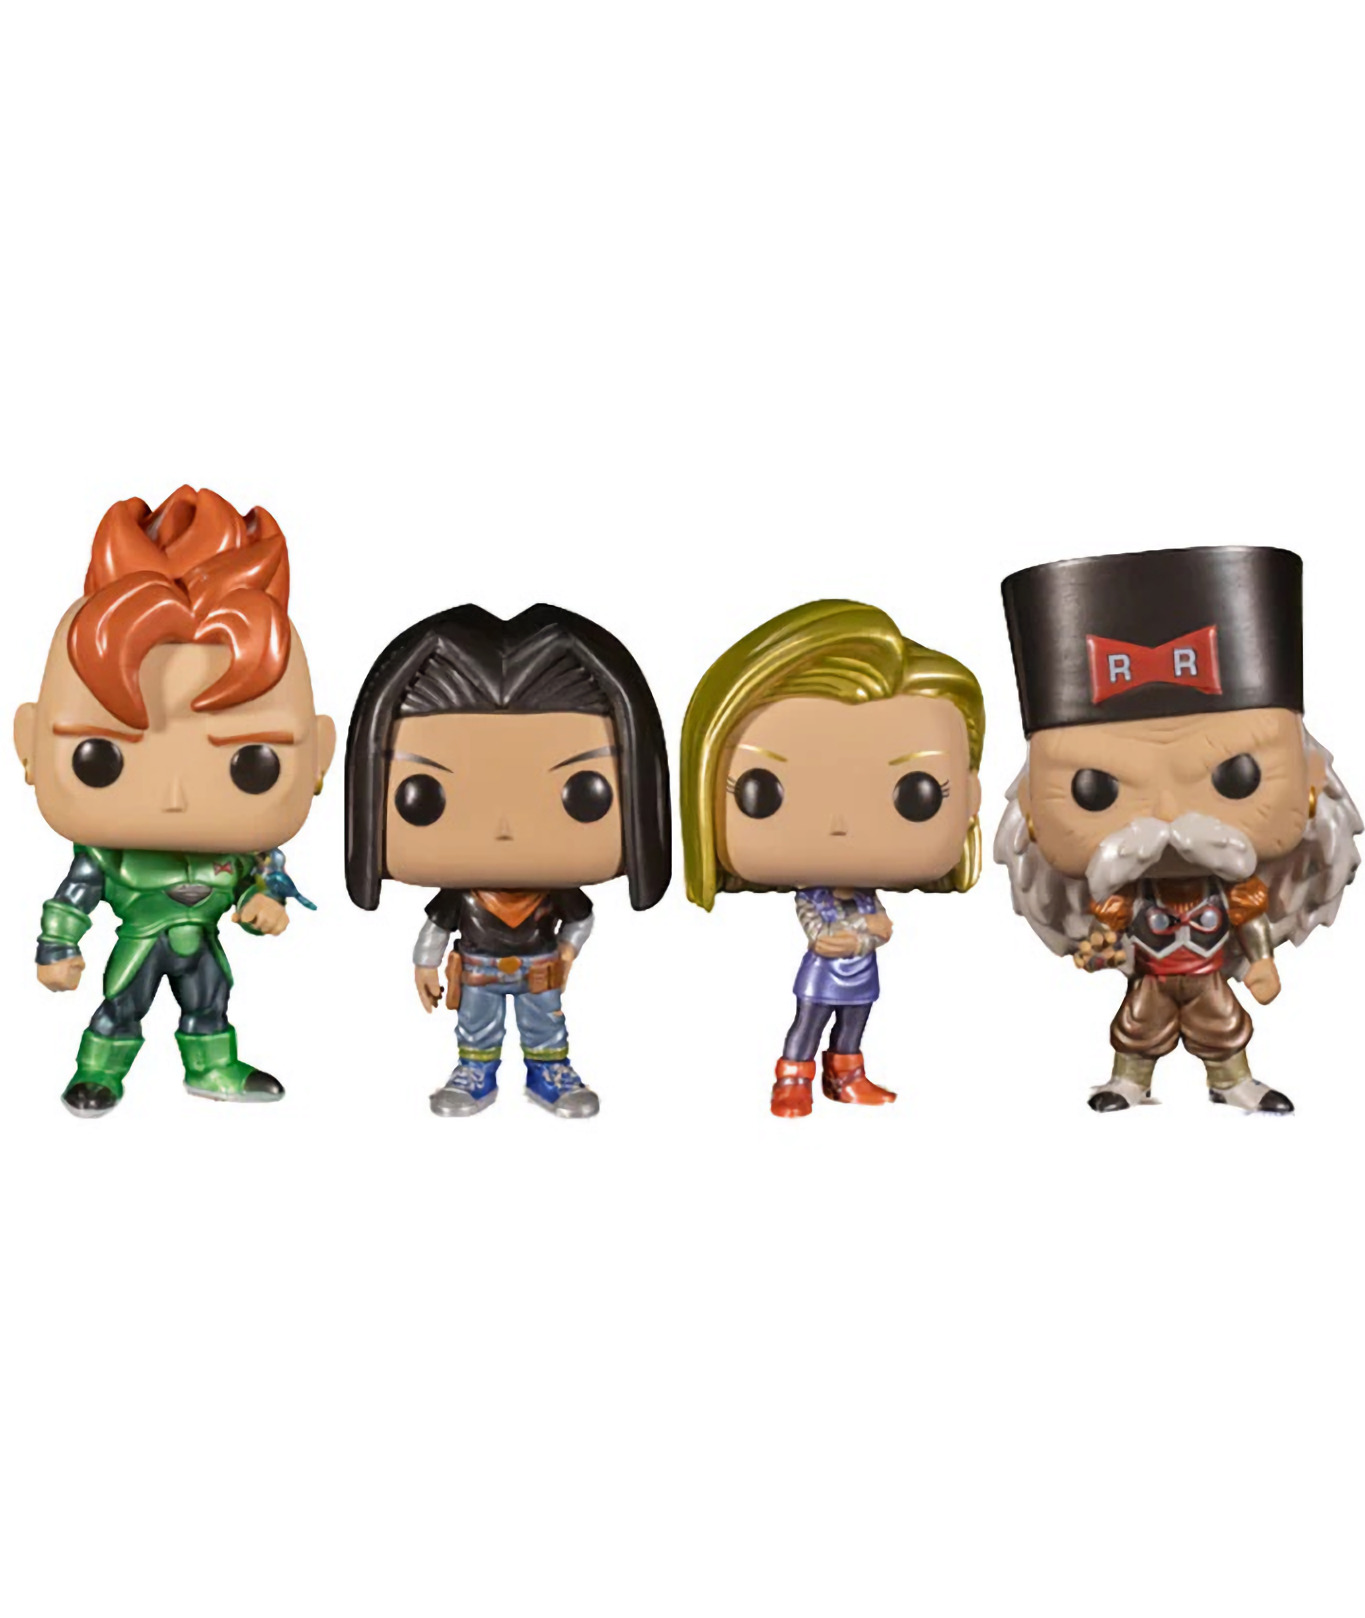 Figúrka Dragon Ball Z- Android 16, Android 17, Android 18 & Dr. Gero (Funko POP! Animation) (4-pack)